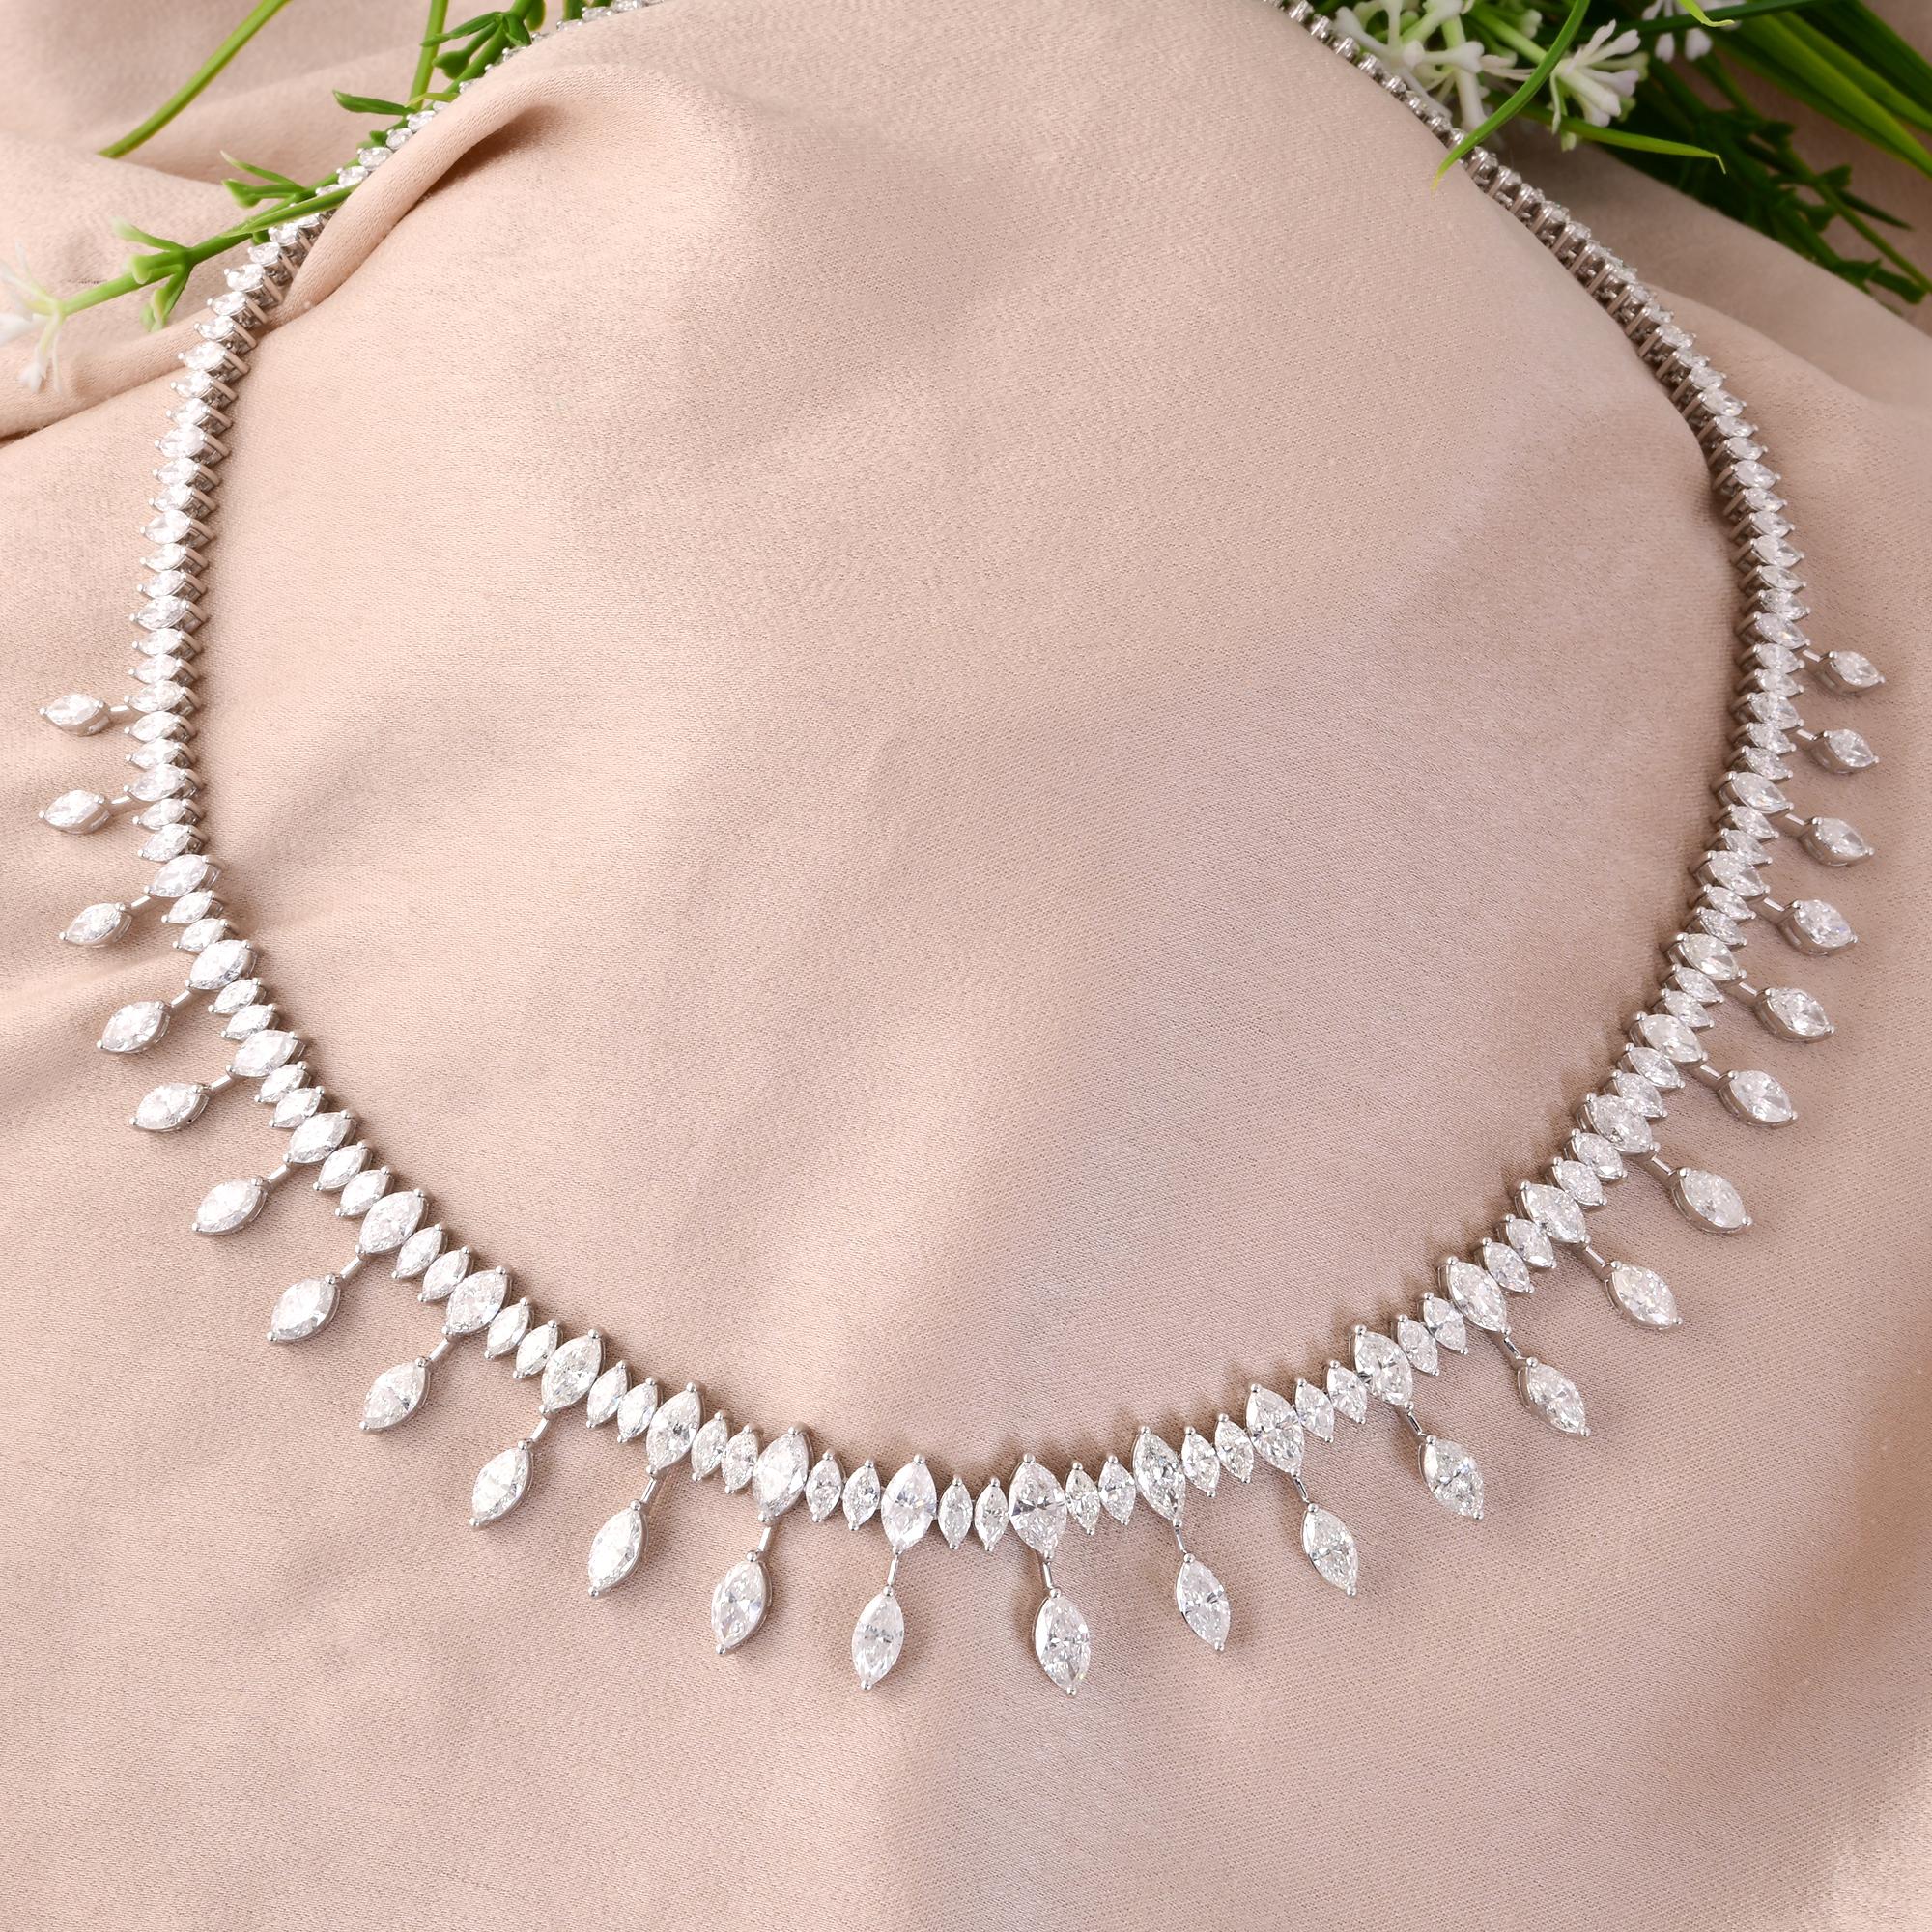 Modern Natural 26.36 Carat Marquise Diamond Choker Necklace 14 Karat White Gold Jewelry For Sale